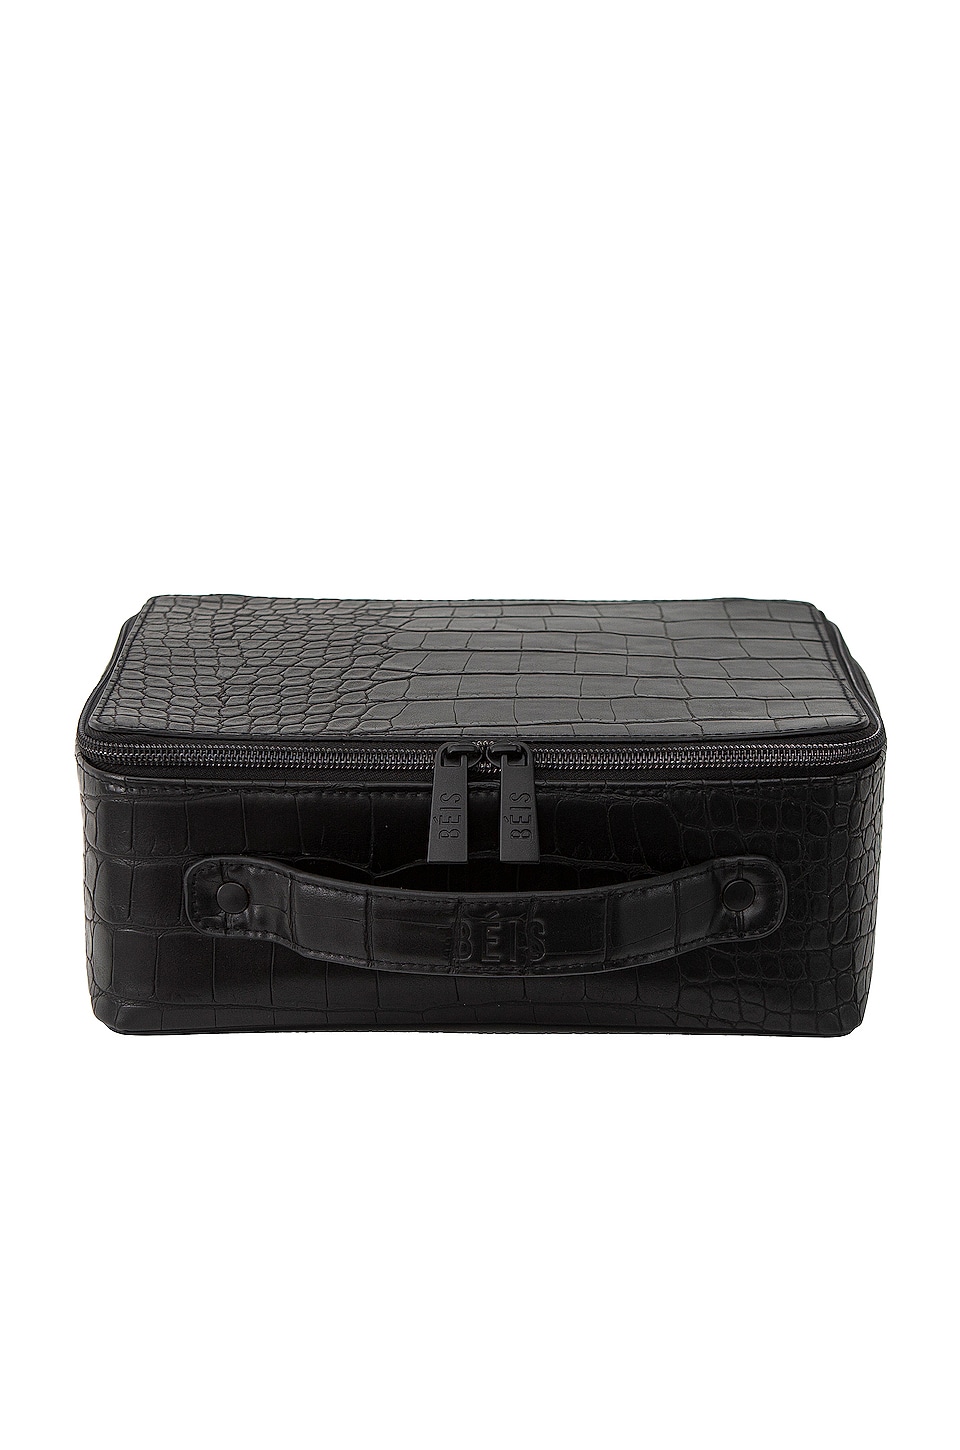 beis cosmetic case revolve